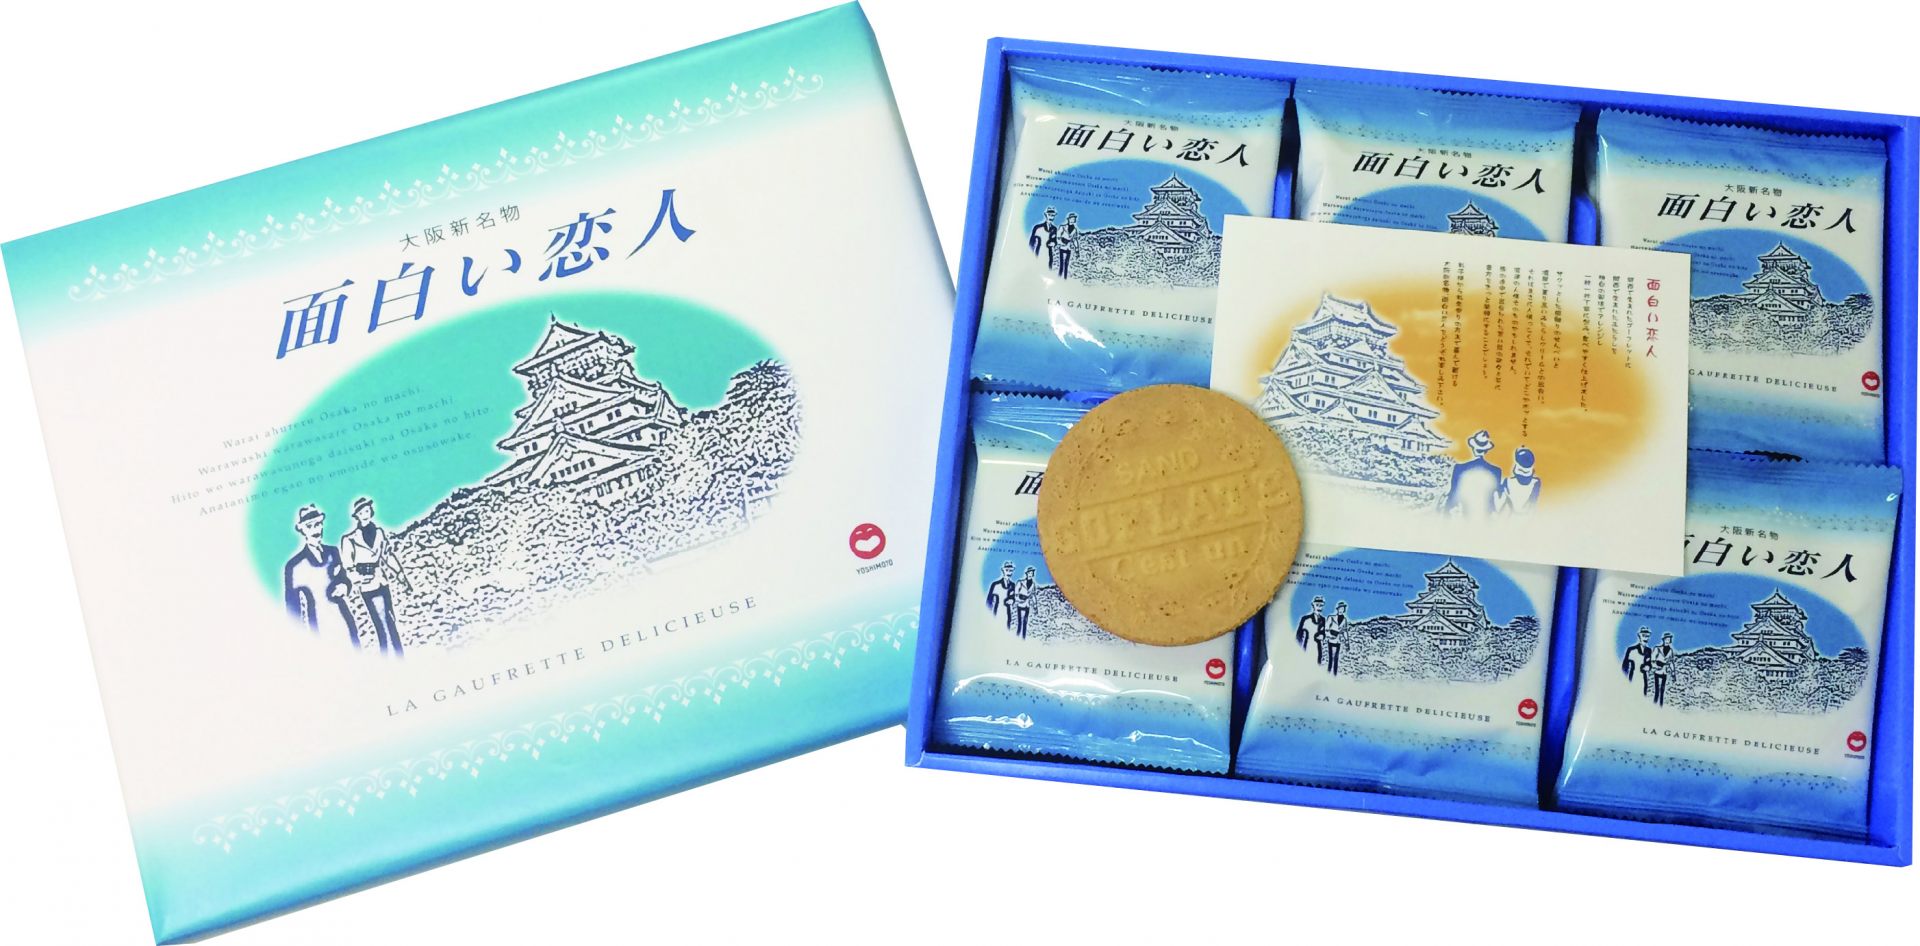 A whole new type of sweet souvenir from Osaka that’s sure to make you chuckle. A Kansai-made gaufrette wafer sandwich with Kansai-made mitarashi and other flavors that people of all ages love.